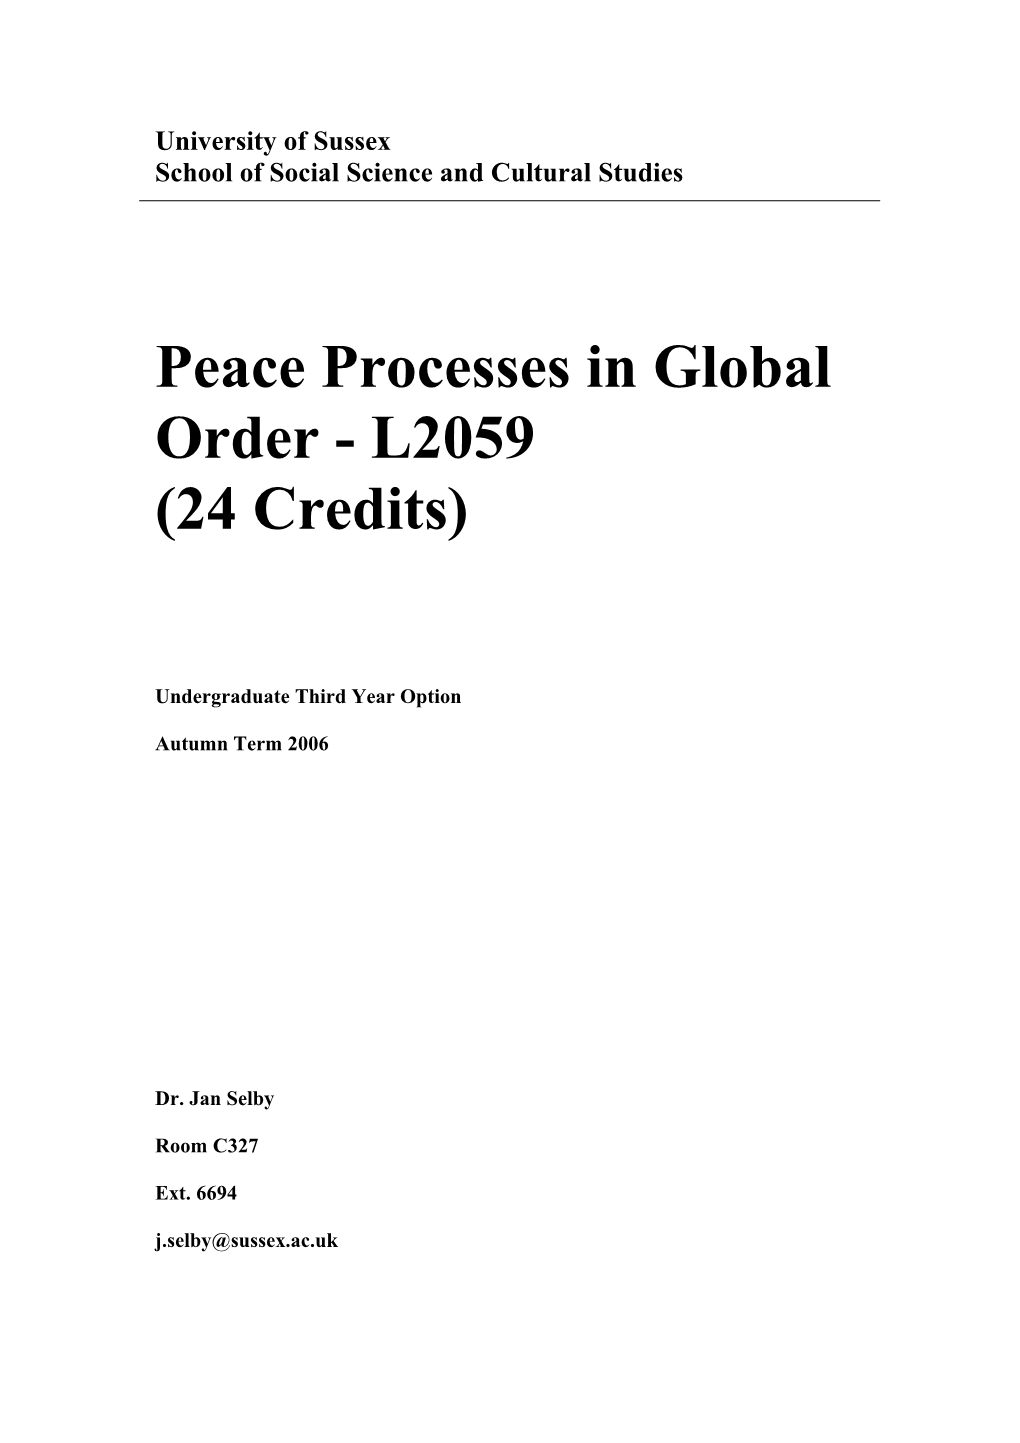 Peace Processes in Global Order